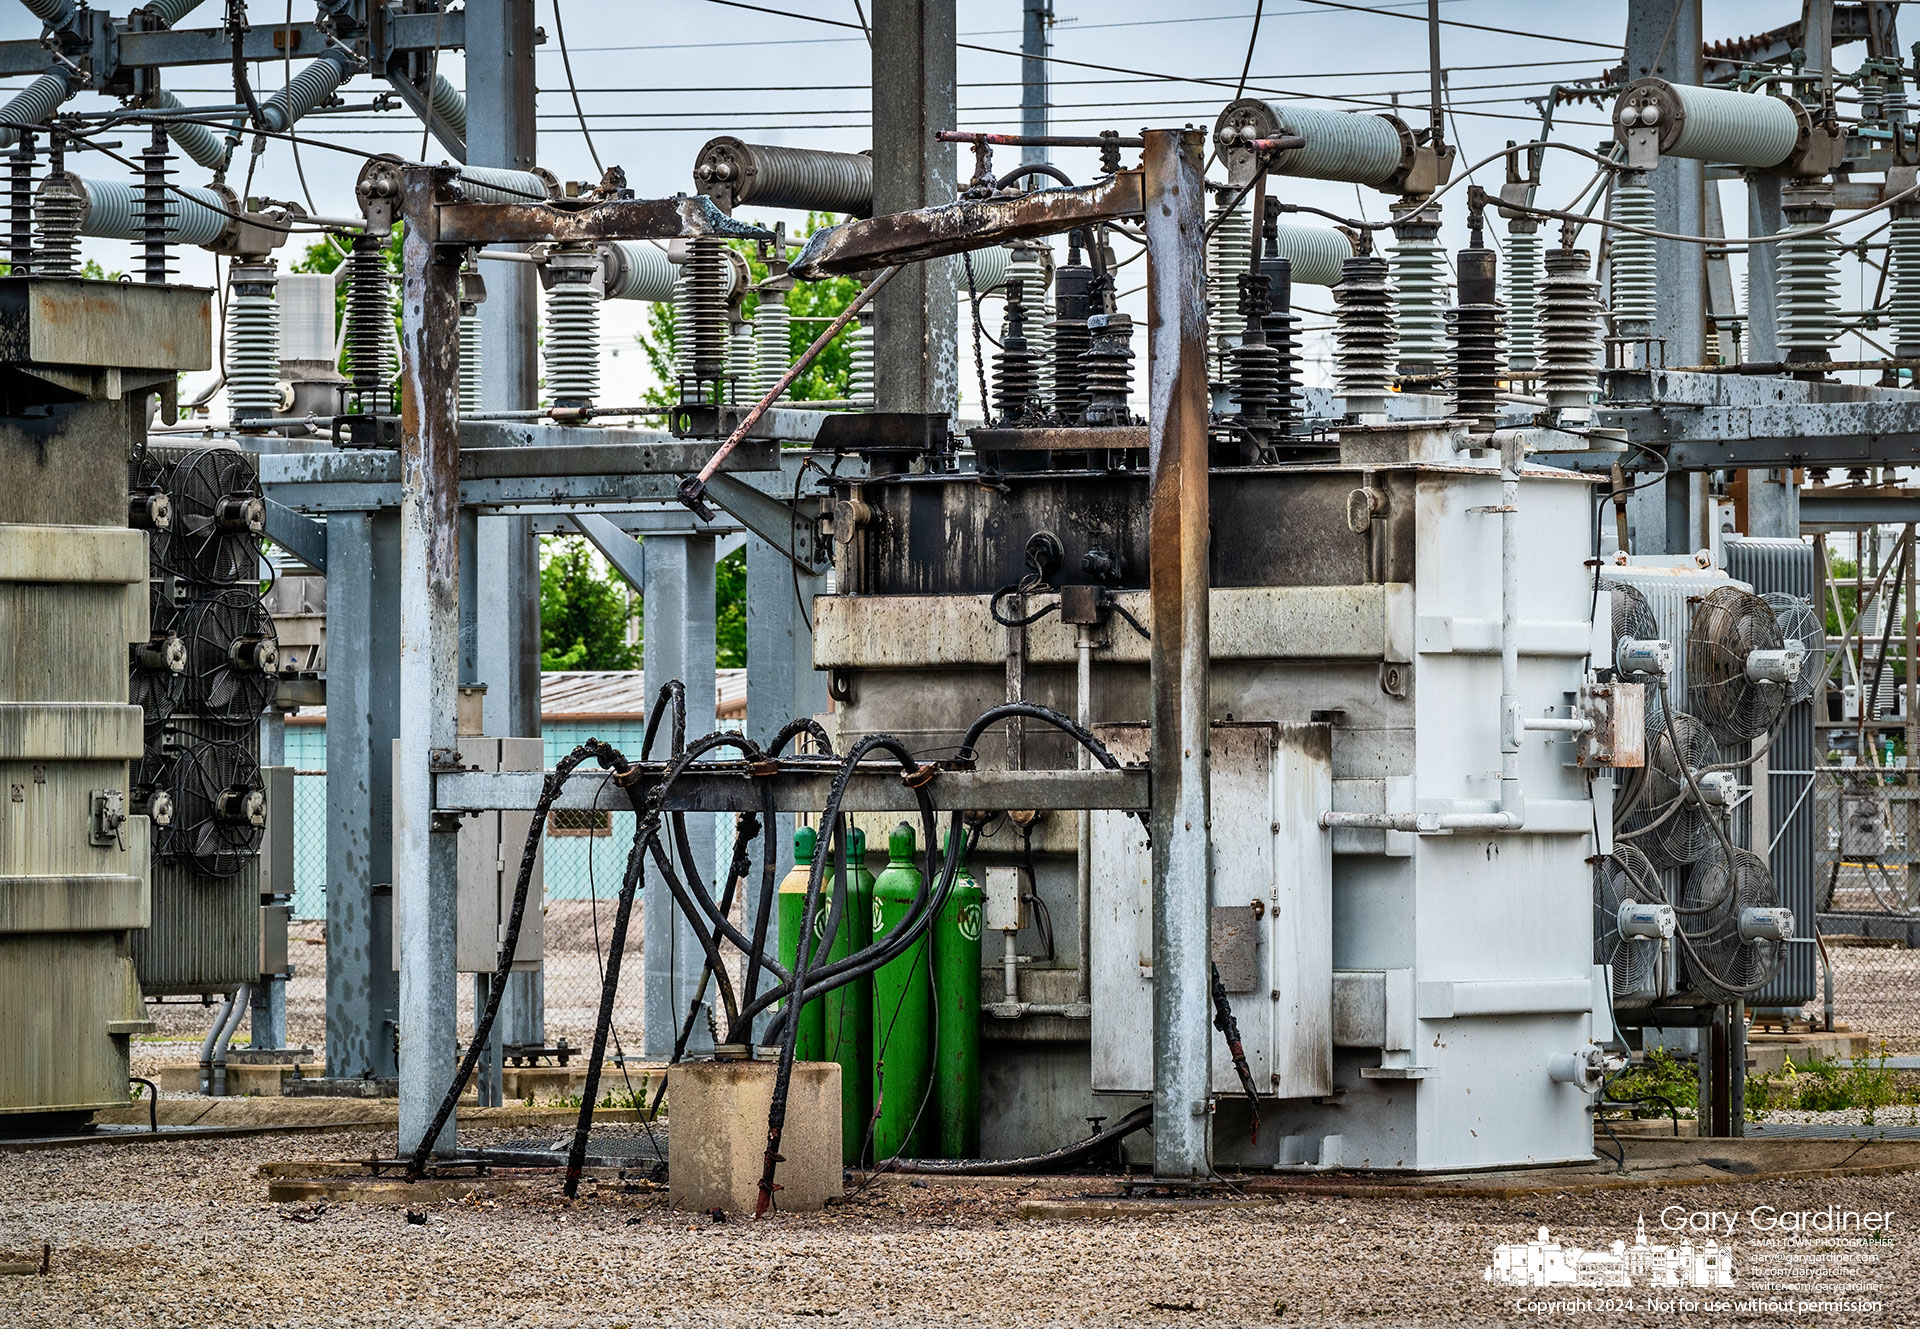 Burned, charred, and melted sections show the damage to a Westerville electric substation that exploded and caught fire early Tuesday morning. My Final Photo for May 14, 2024.